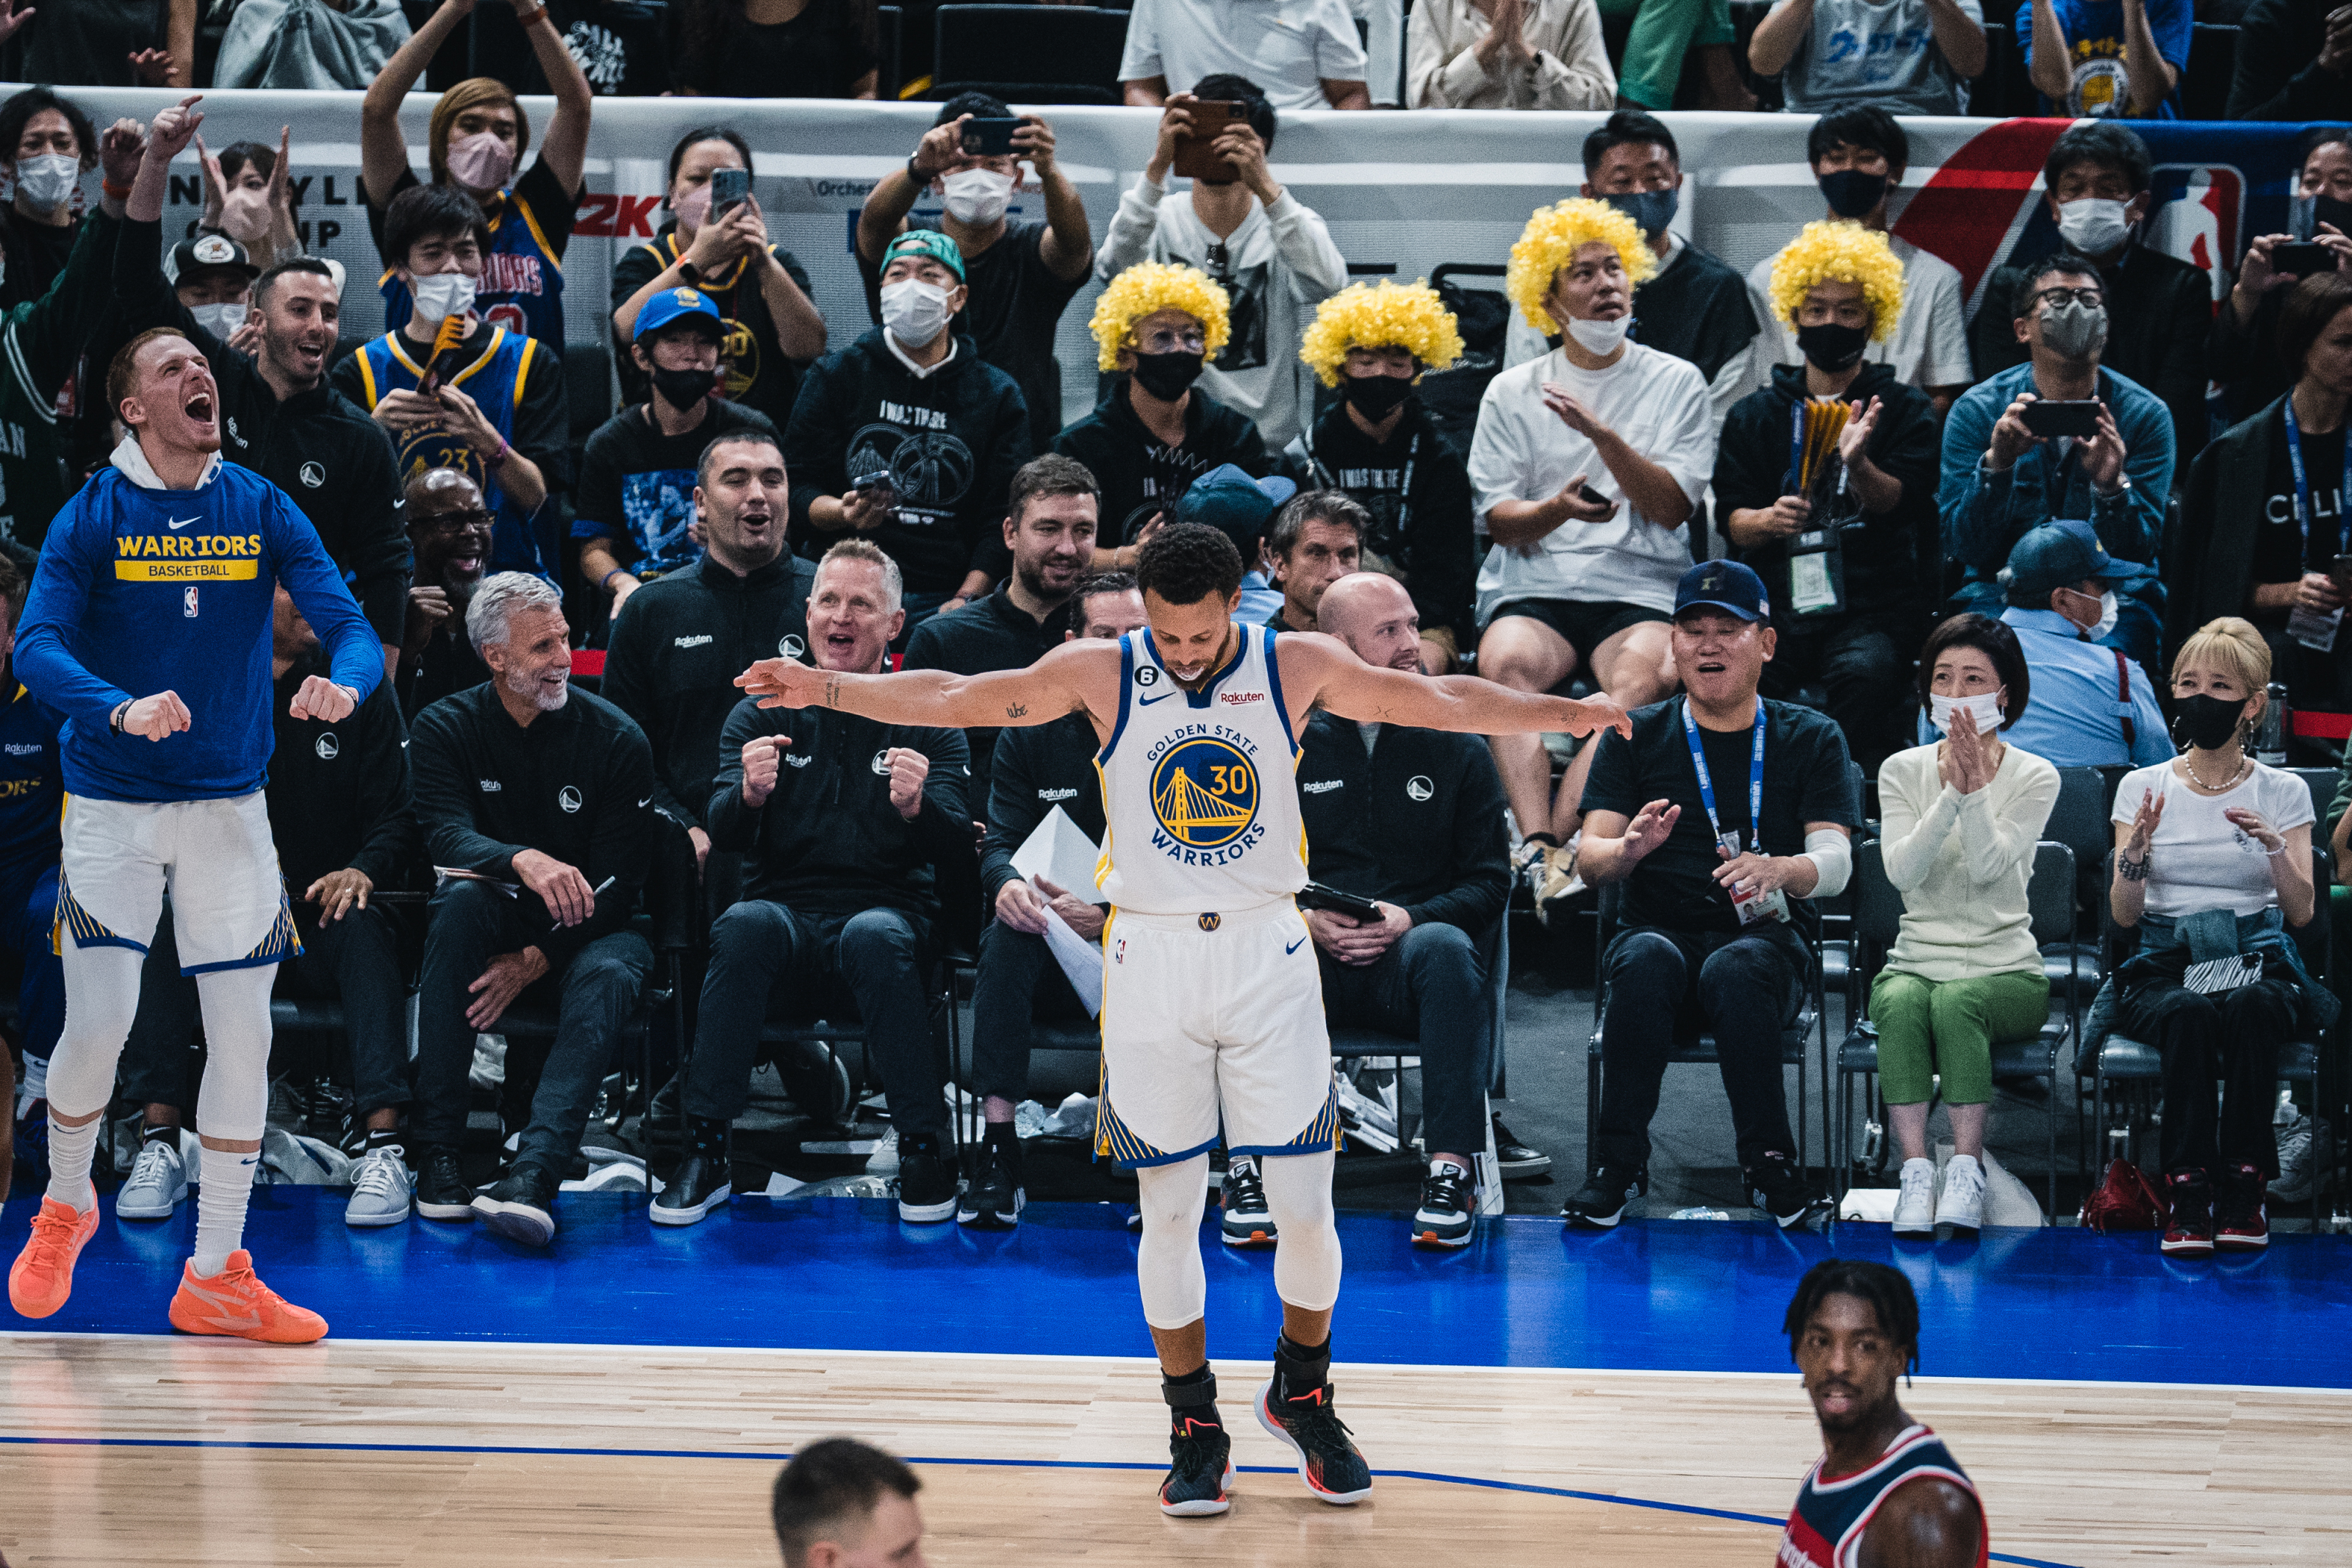 EVERY NBA Record That Steph Curry Has RIDICULOUSLY Broken 